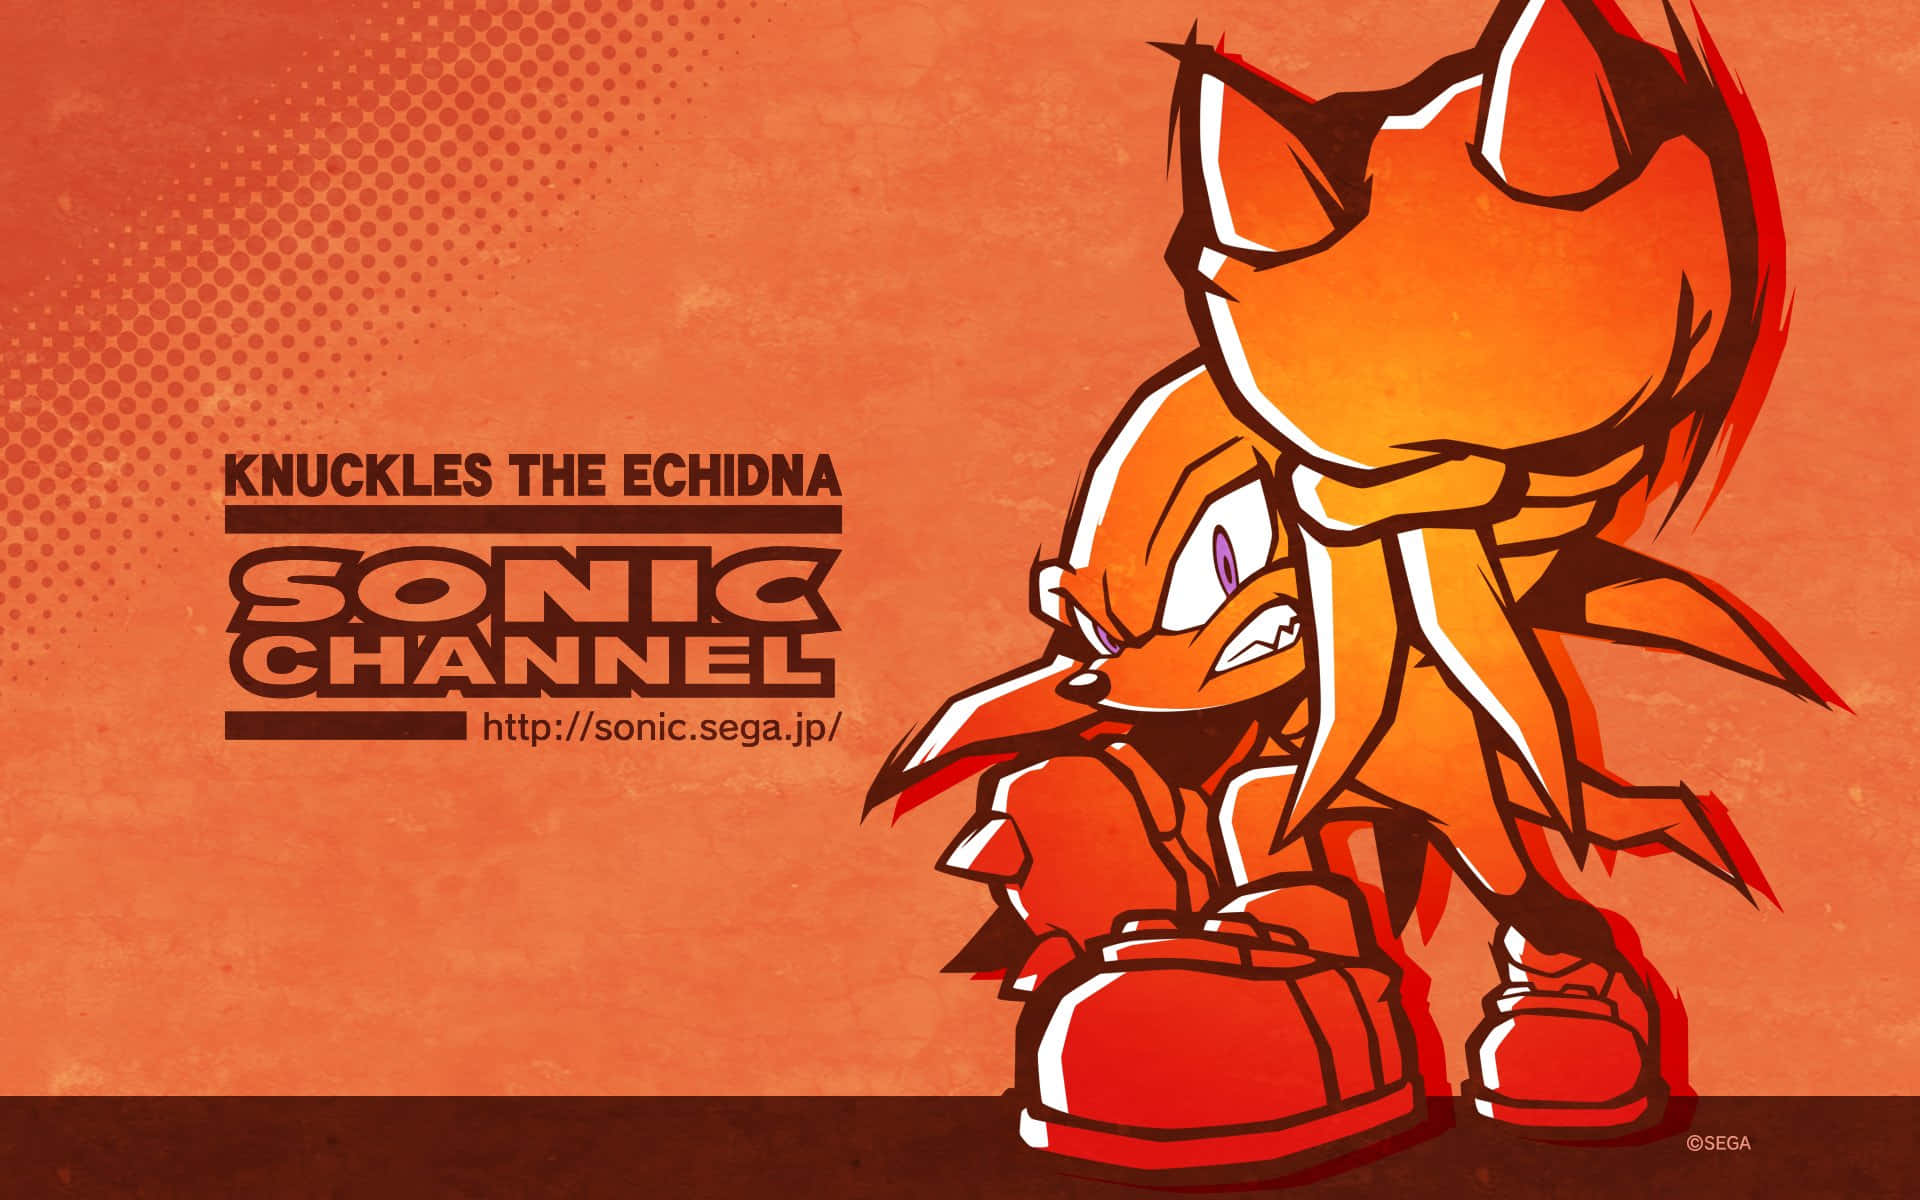 Knuckles The Echidna From Sonic The Hedgehog